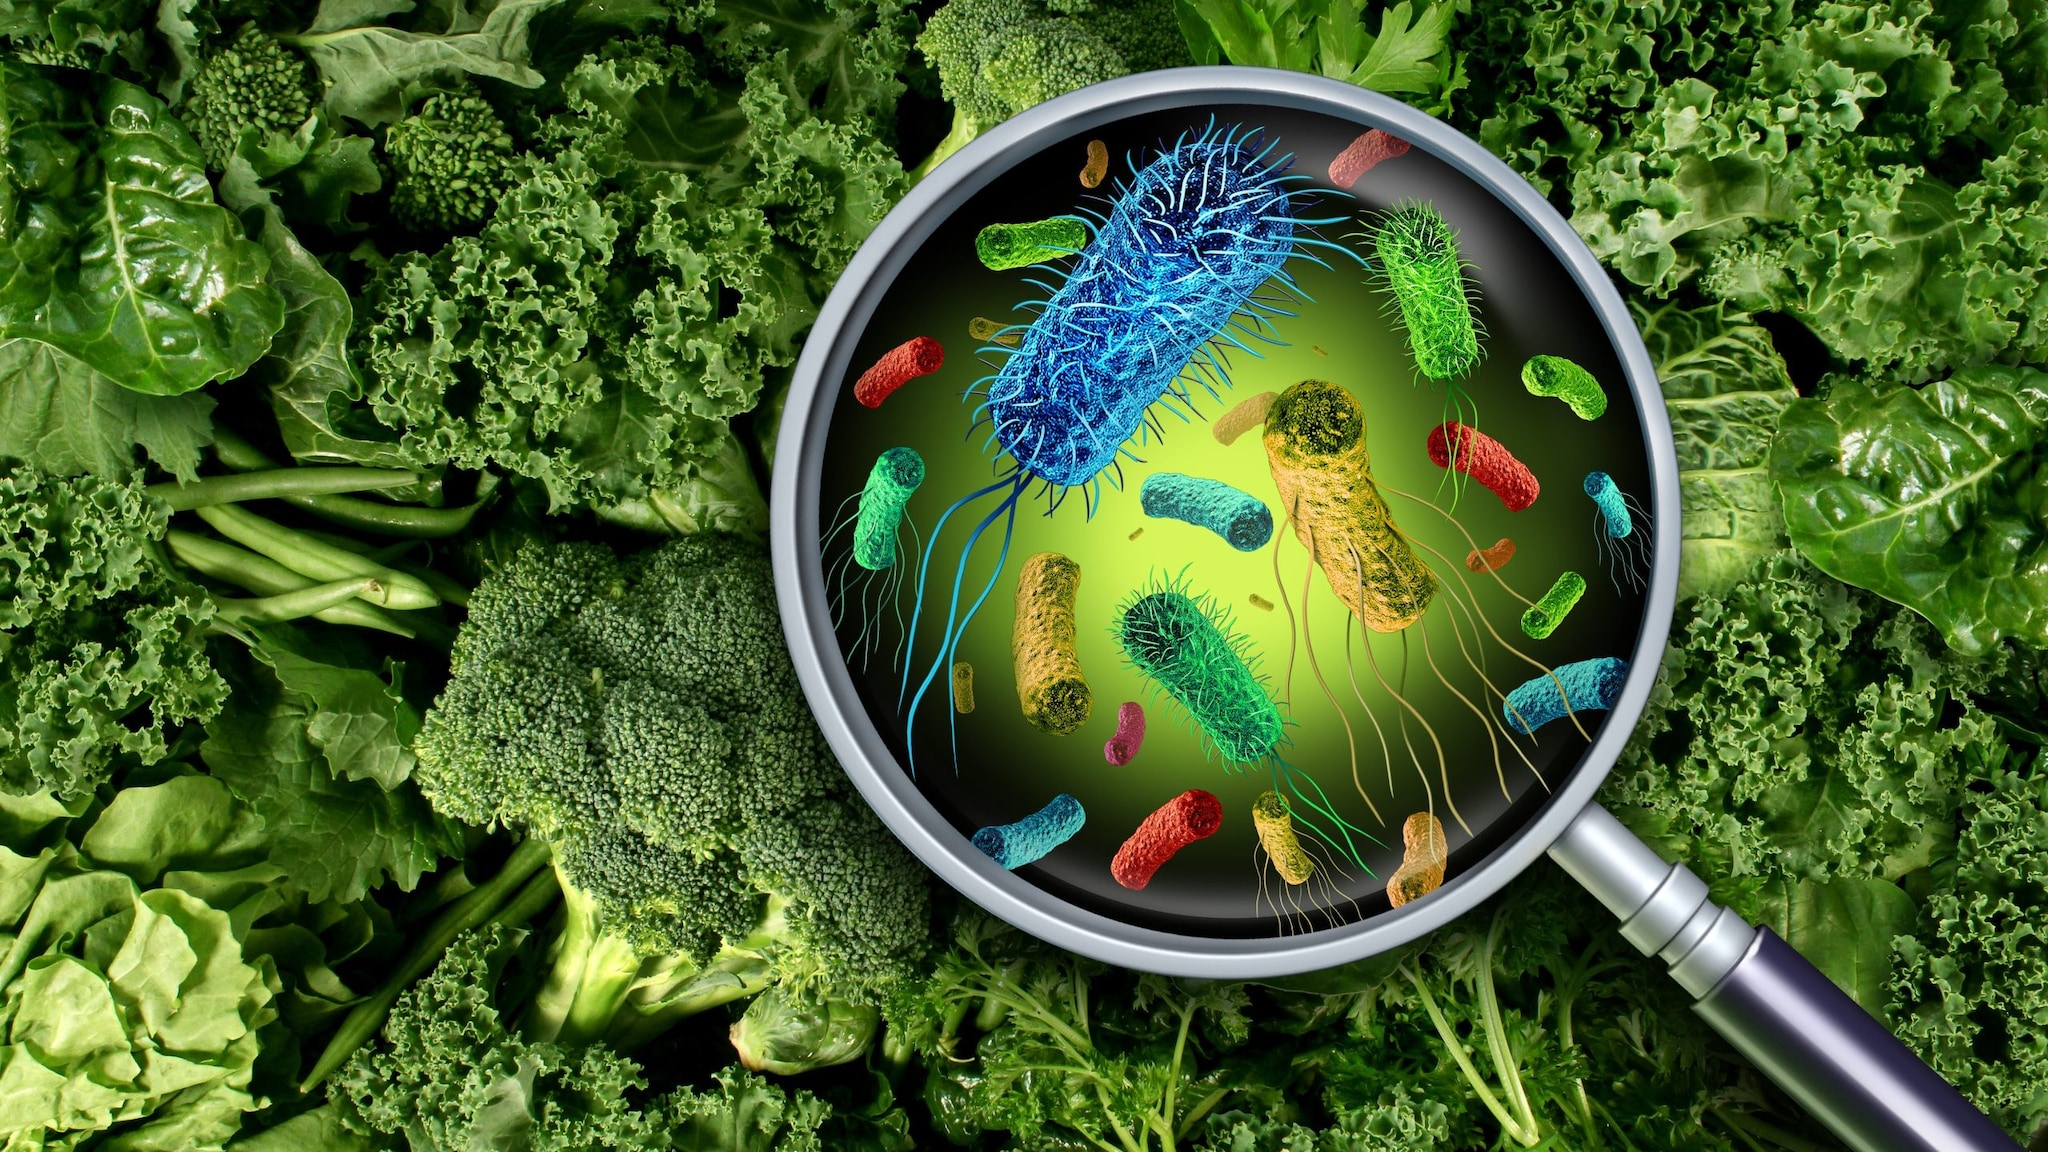 Image shows a magnifying glass looking at germs on lettuce.